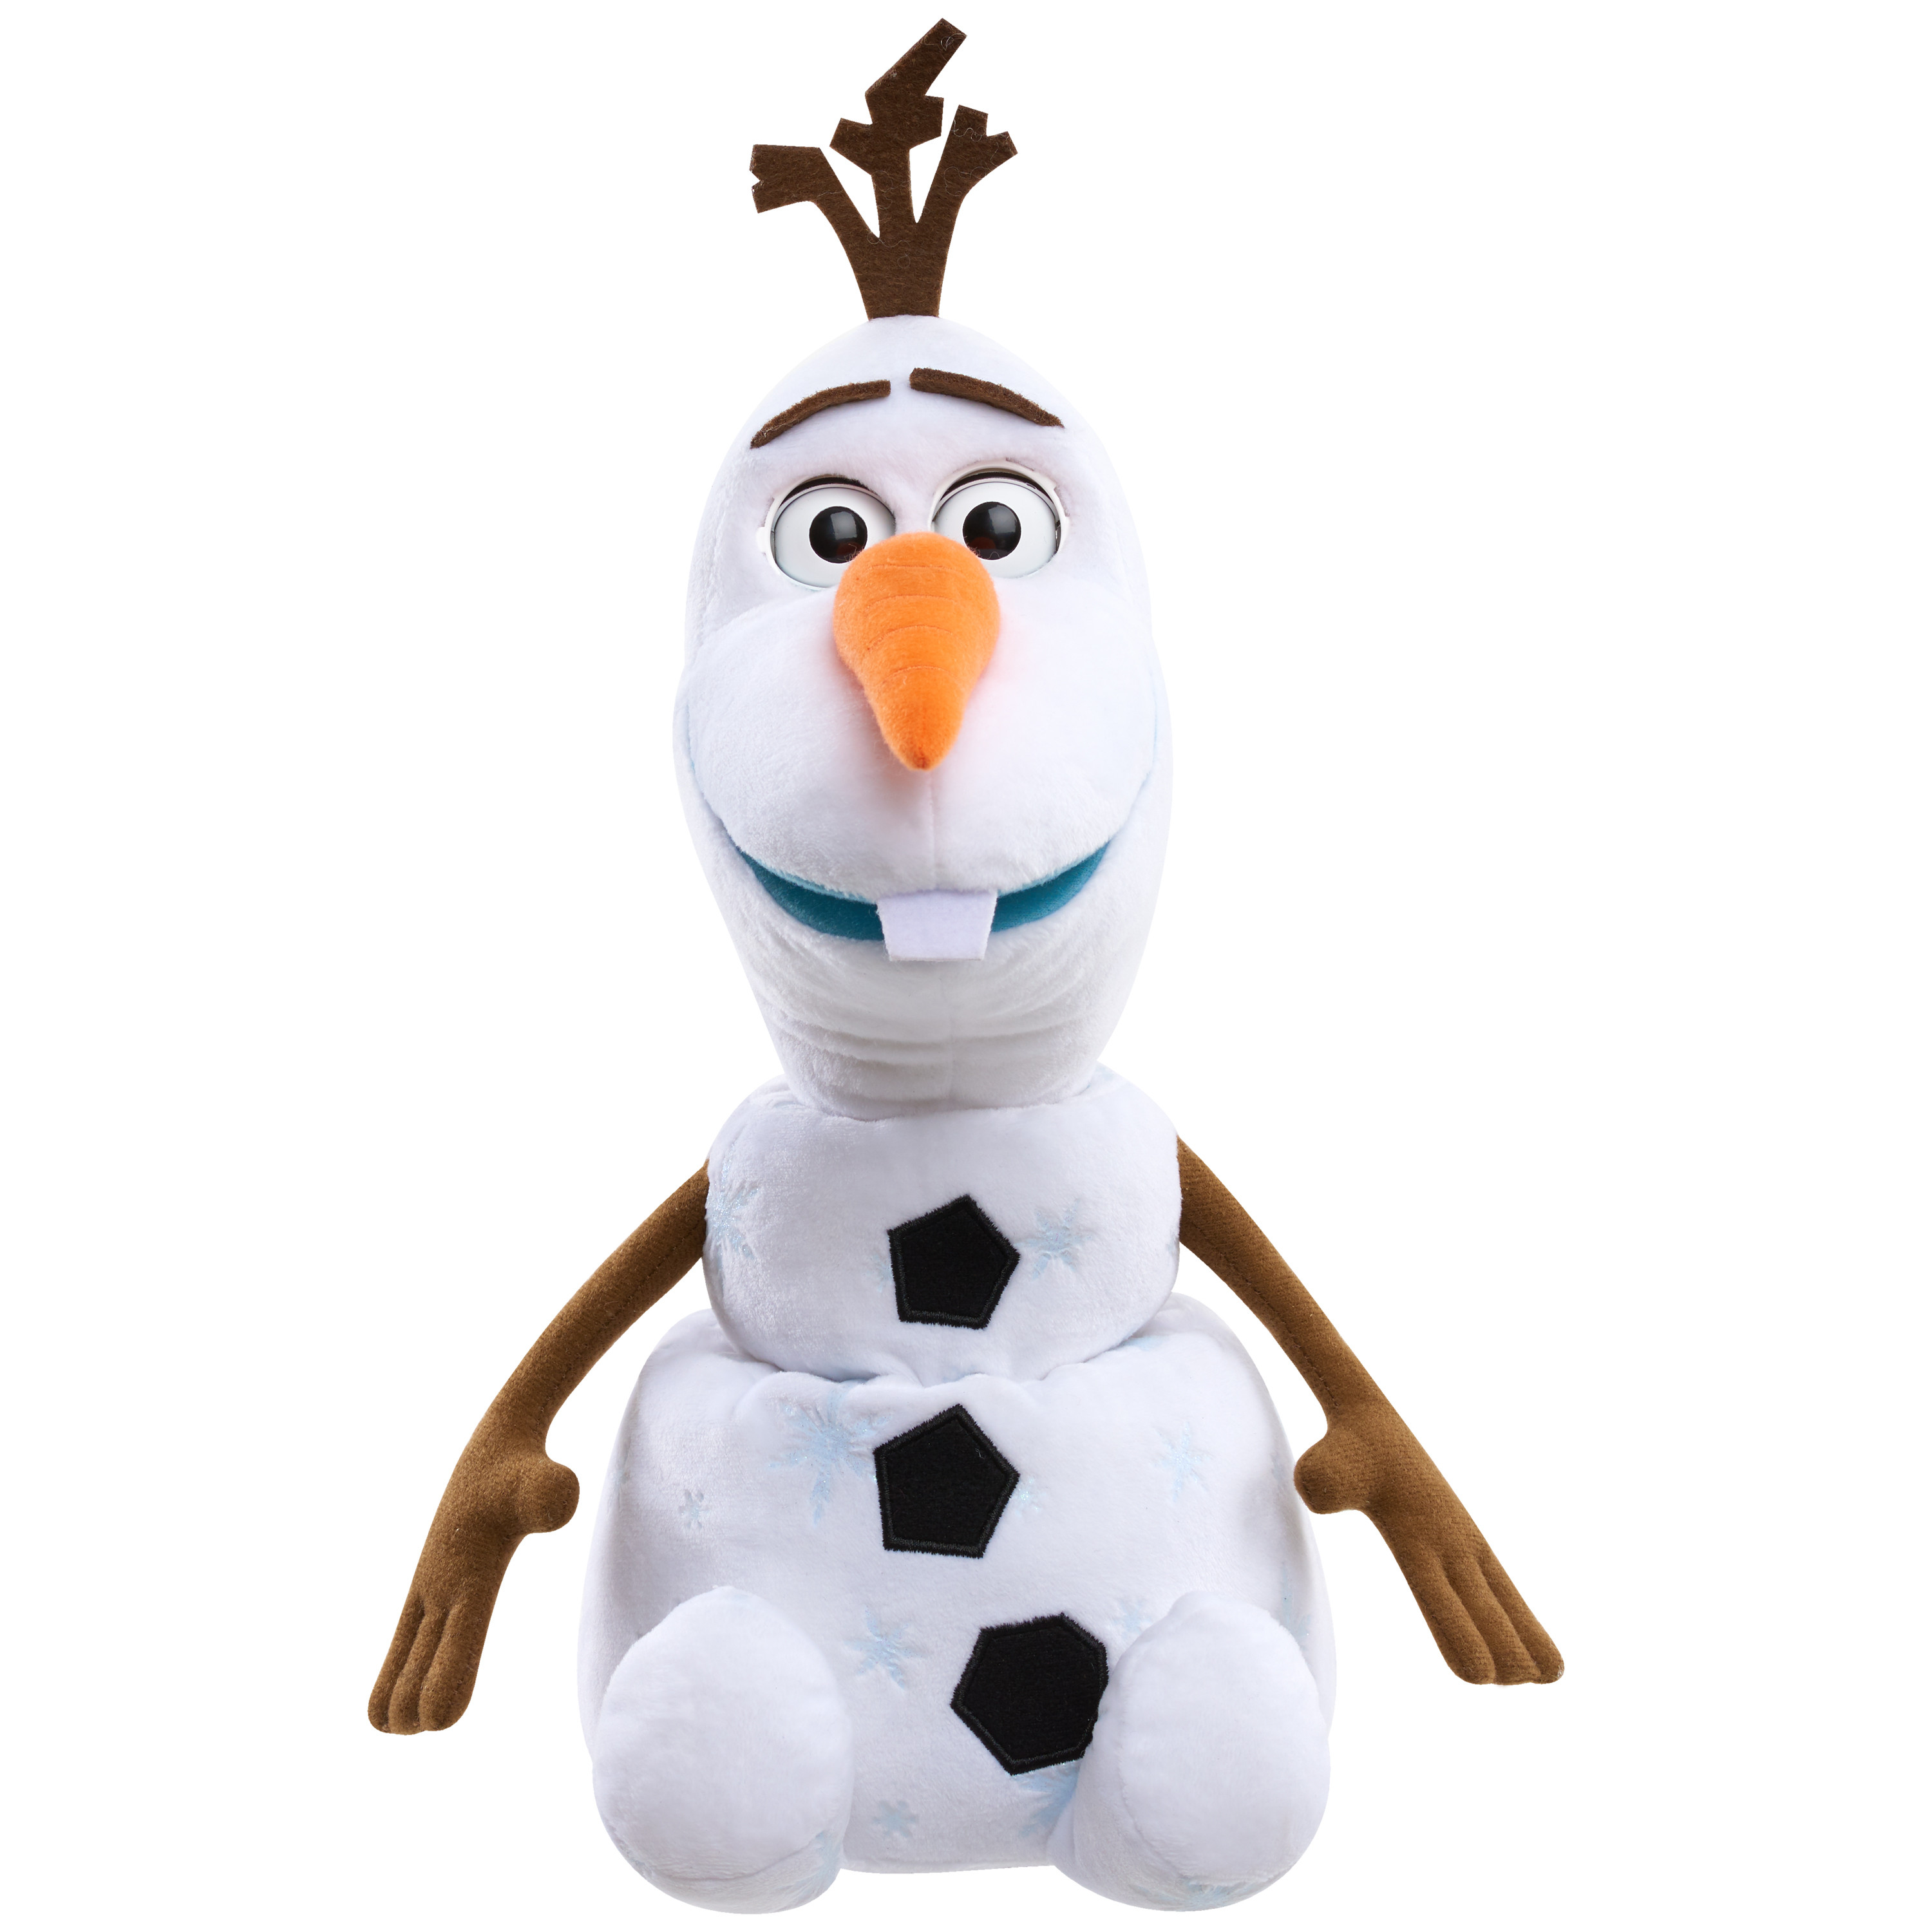 Disney Frozen 2 Spring & Surprise Olaf, Officially Licensed Kids Toys for Ages 3 Up, Gifts and Presents - image 1 of 4